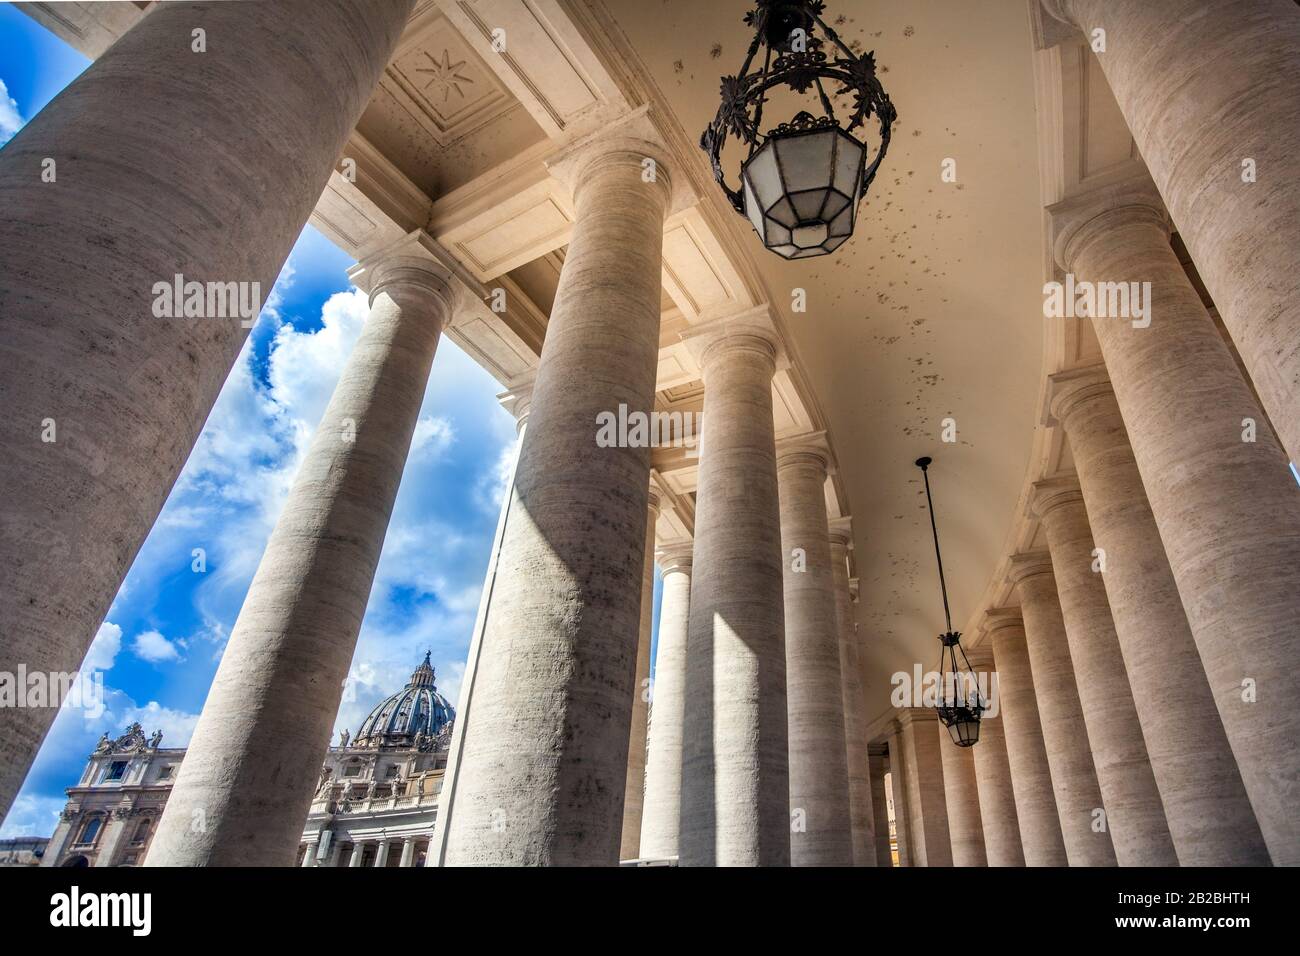 View through the colonnades at St. Peter's Square to St. Peter's Basilica in Rome Lazio Italy Stock Photo